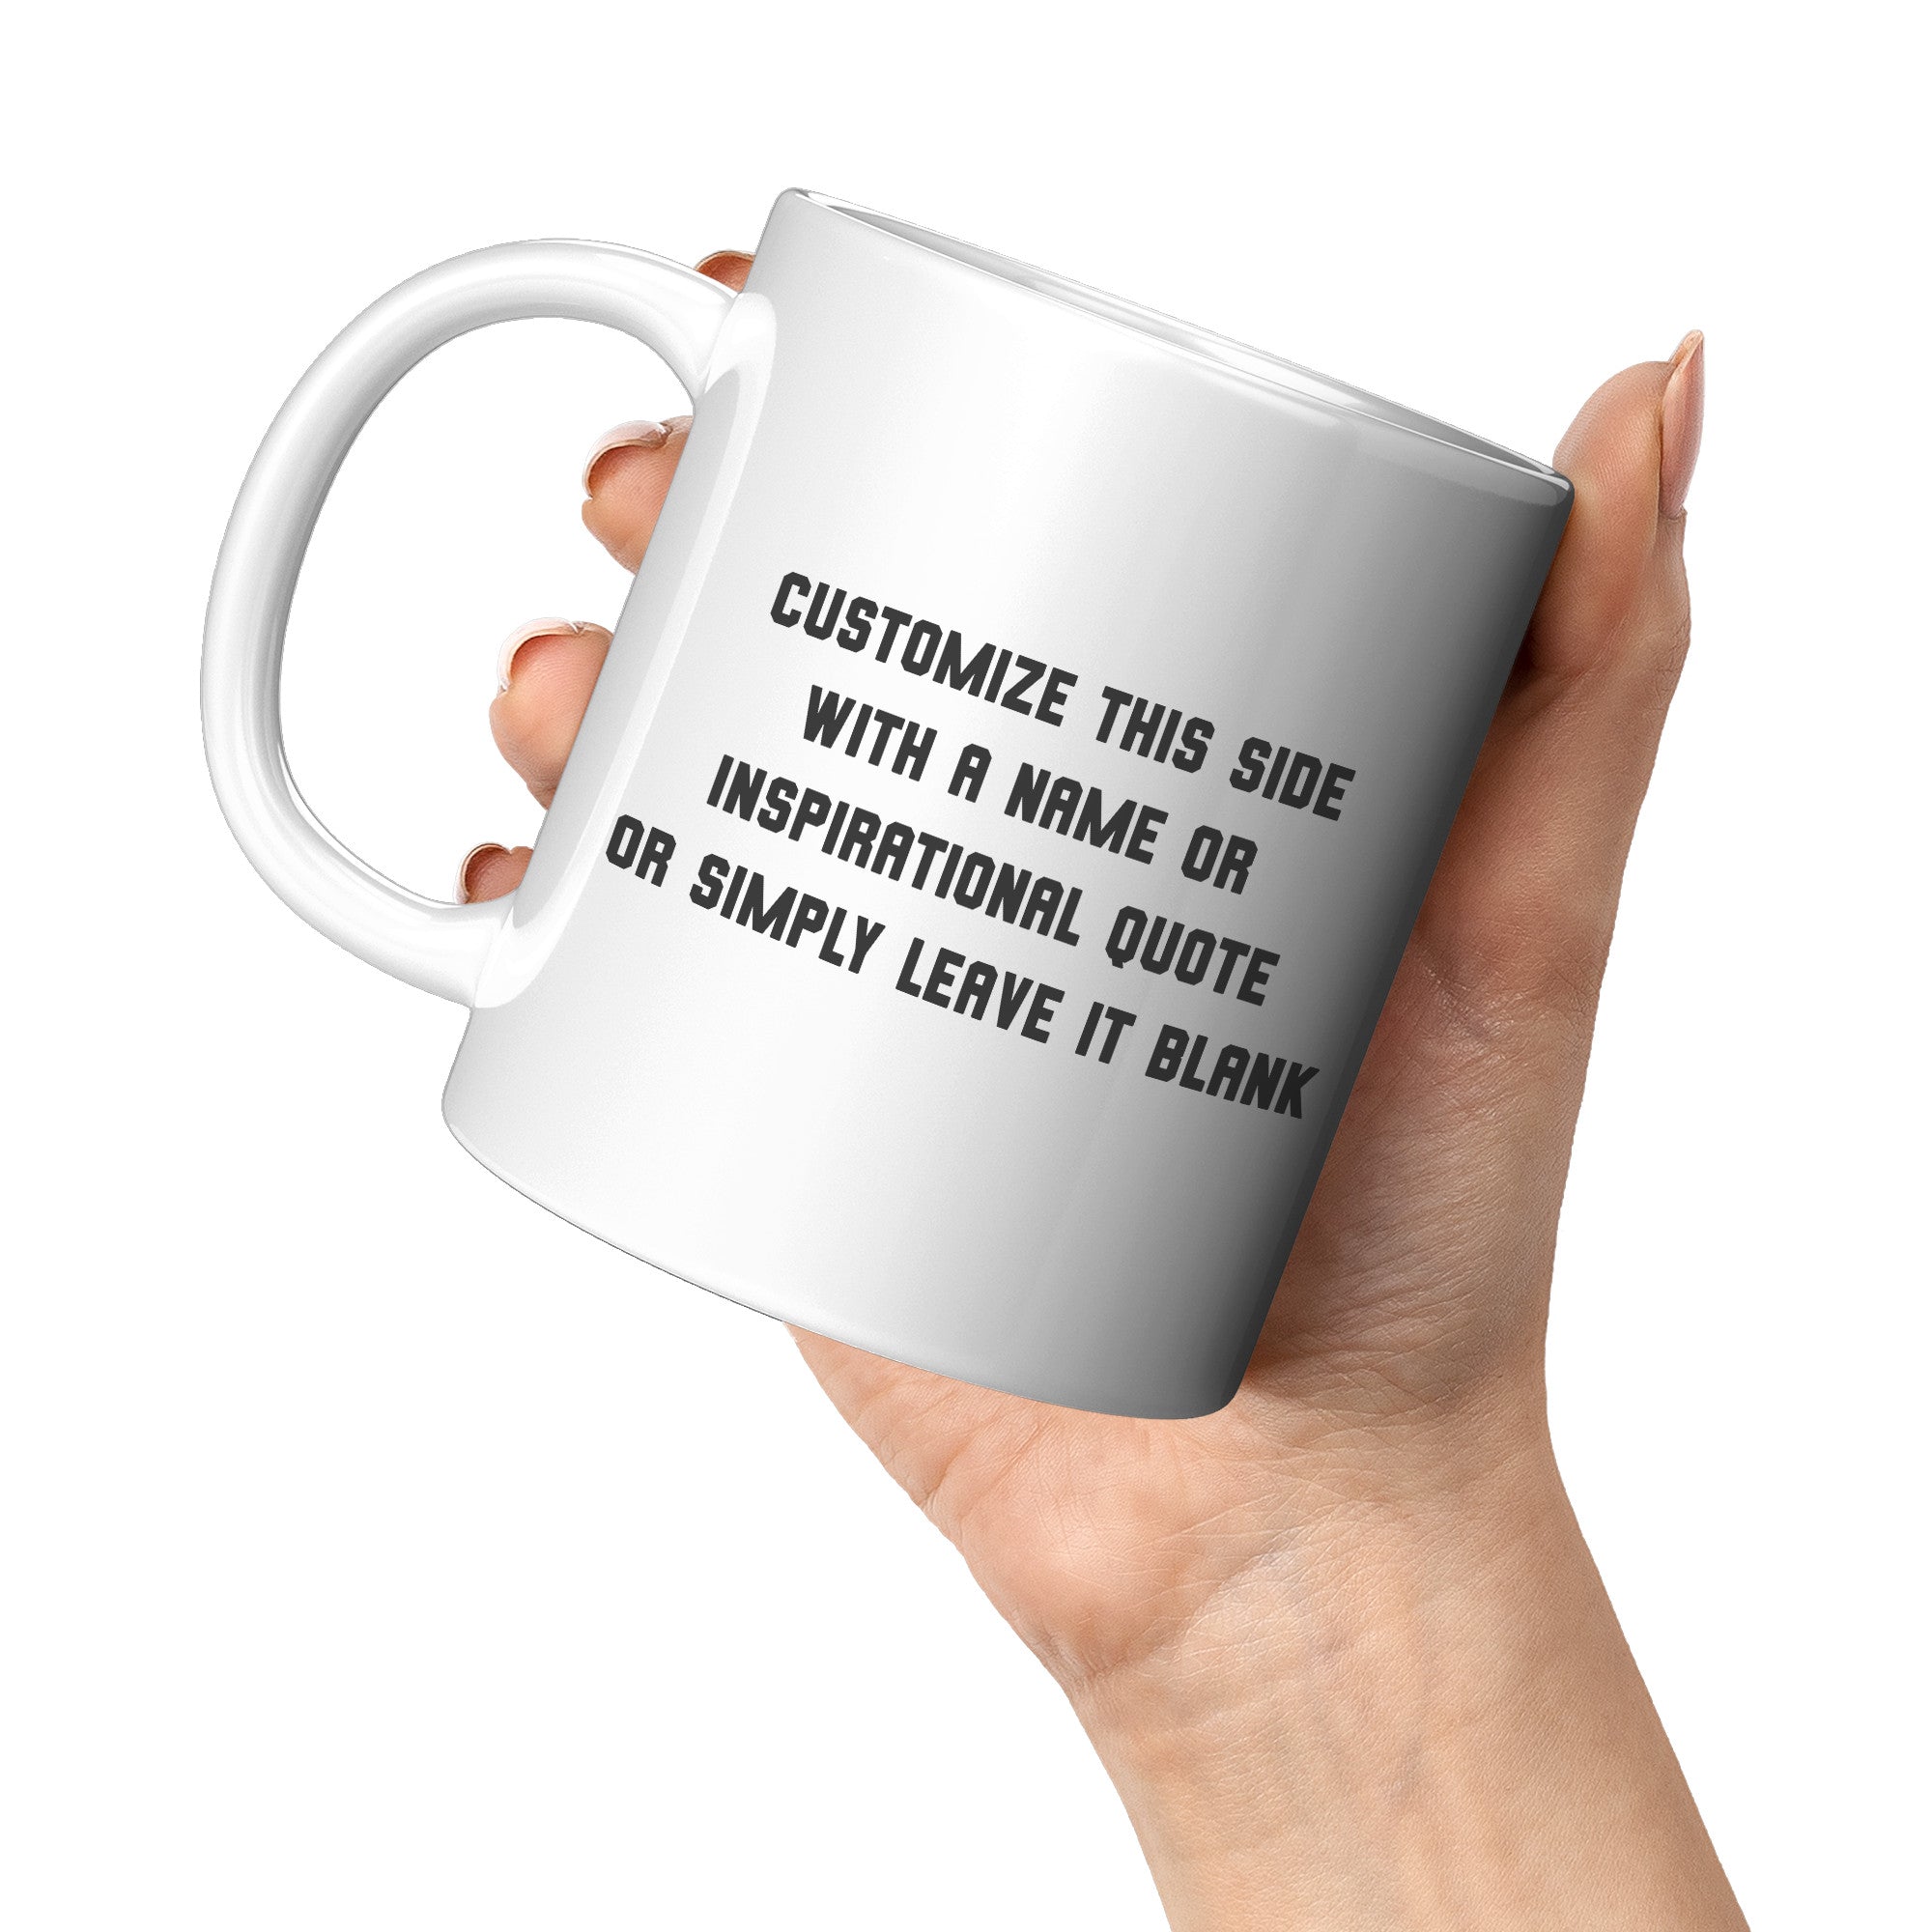 "Female Runner Coffee Mug - Inspirational Running Quotes Cup - Perfect Gift for Women Runners - Motivational Marathoner's Morning Brew" - R